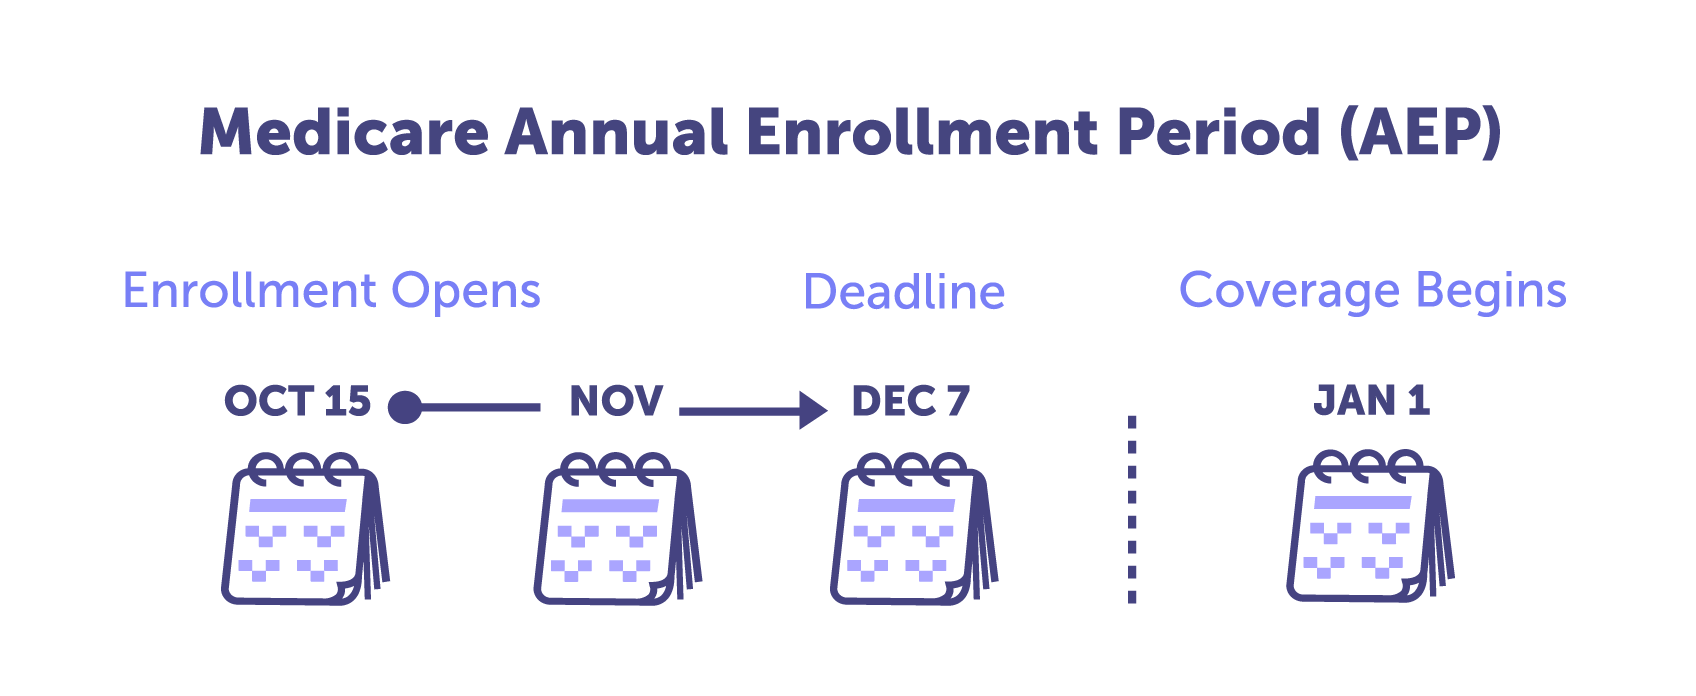 Image showing the Medicare Annual Enrollment Period (AEP), between October 15th and December 7th